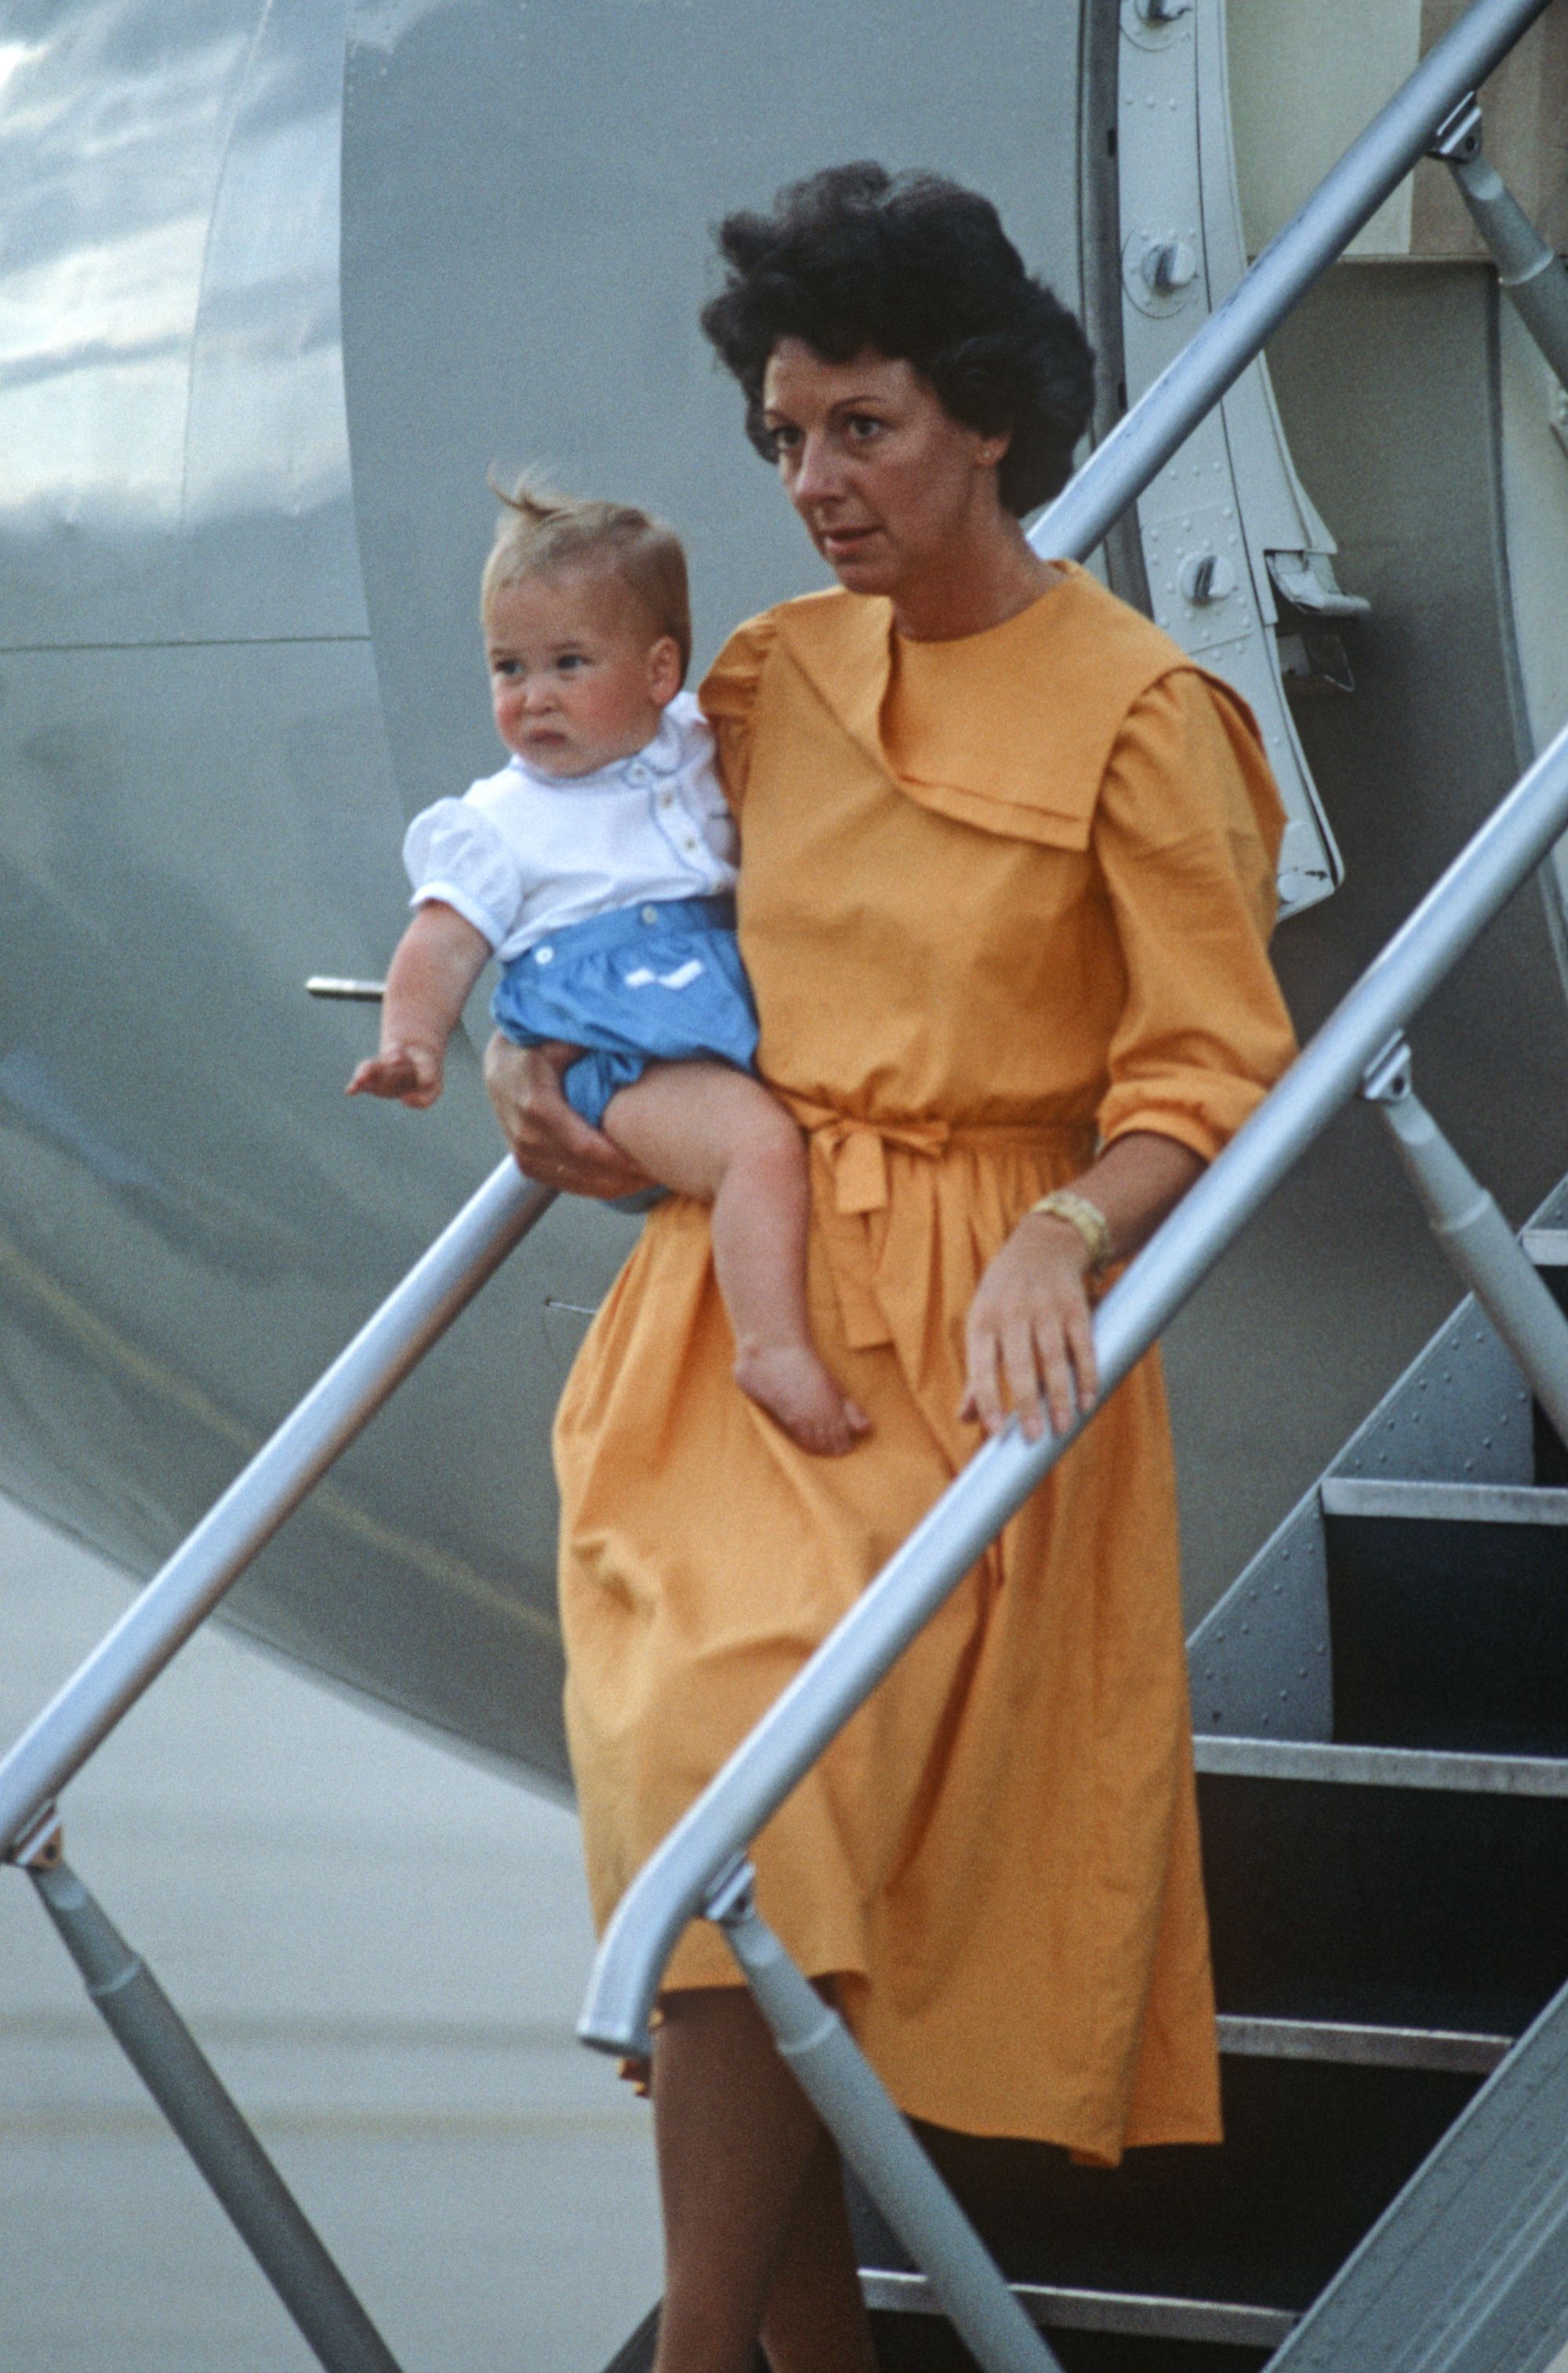 melbourne   april 16 nanny barbara barnes carries prince william off of a plane at melbourne airport, australia on april 16, 1983, at the end of the royal tour of australiaphoto by david levensongetty images